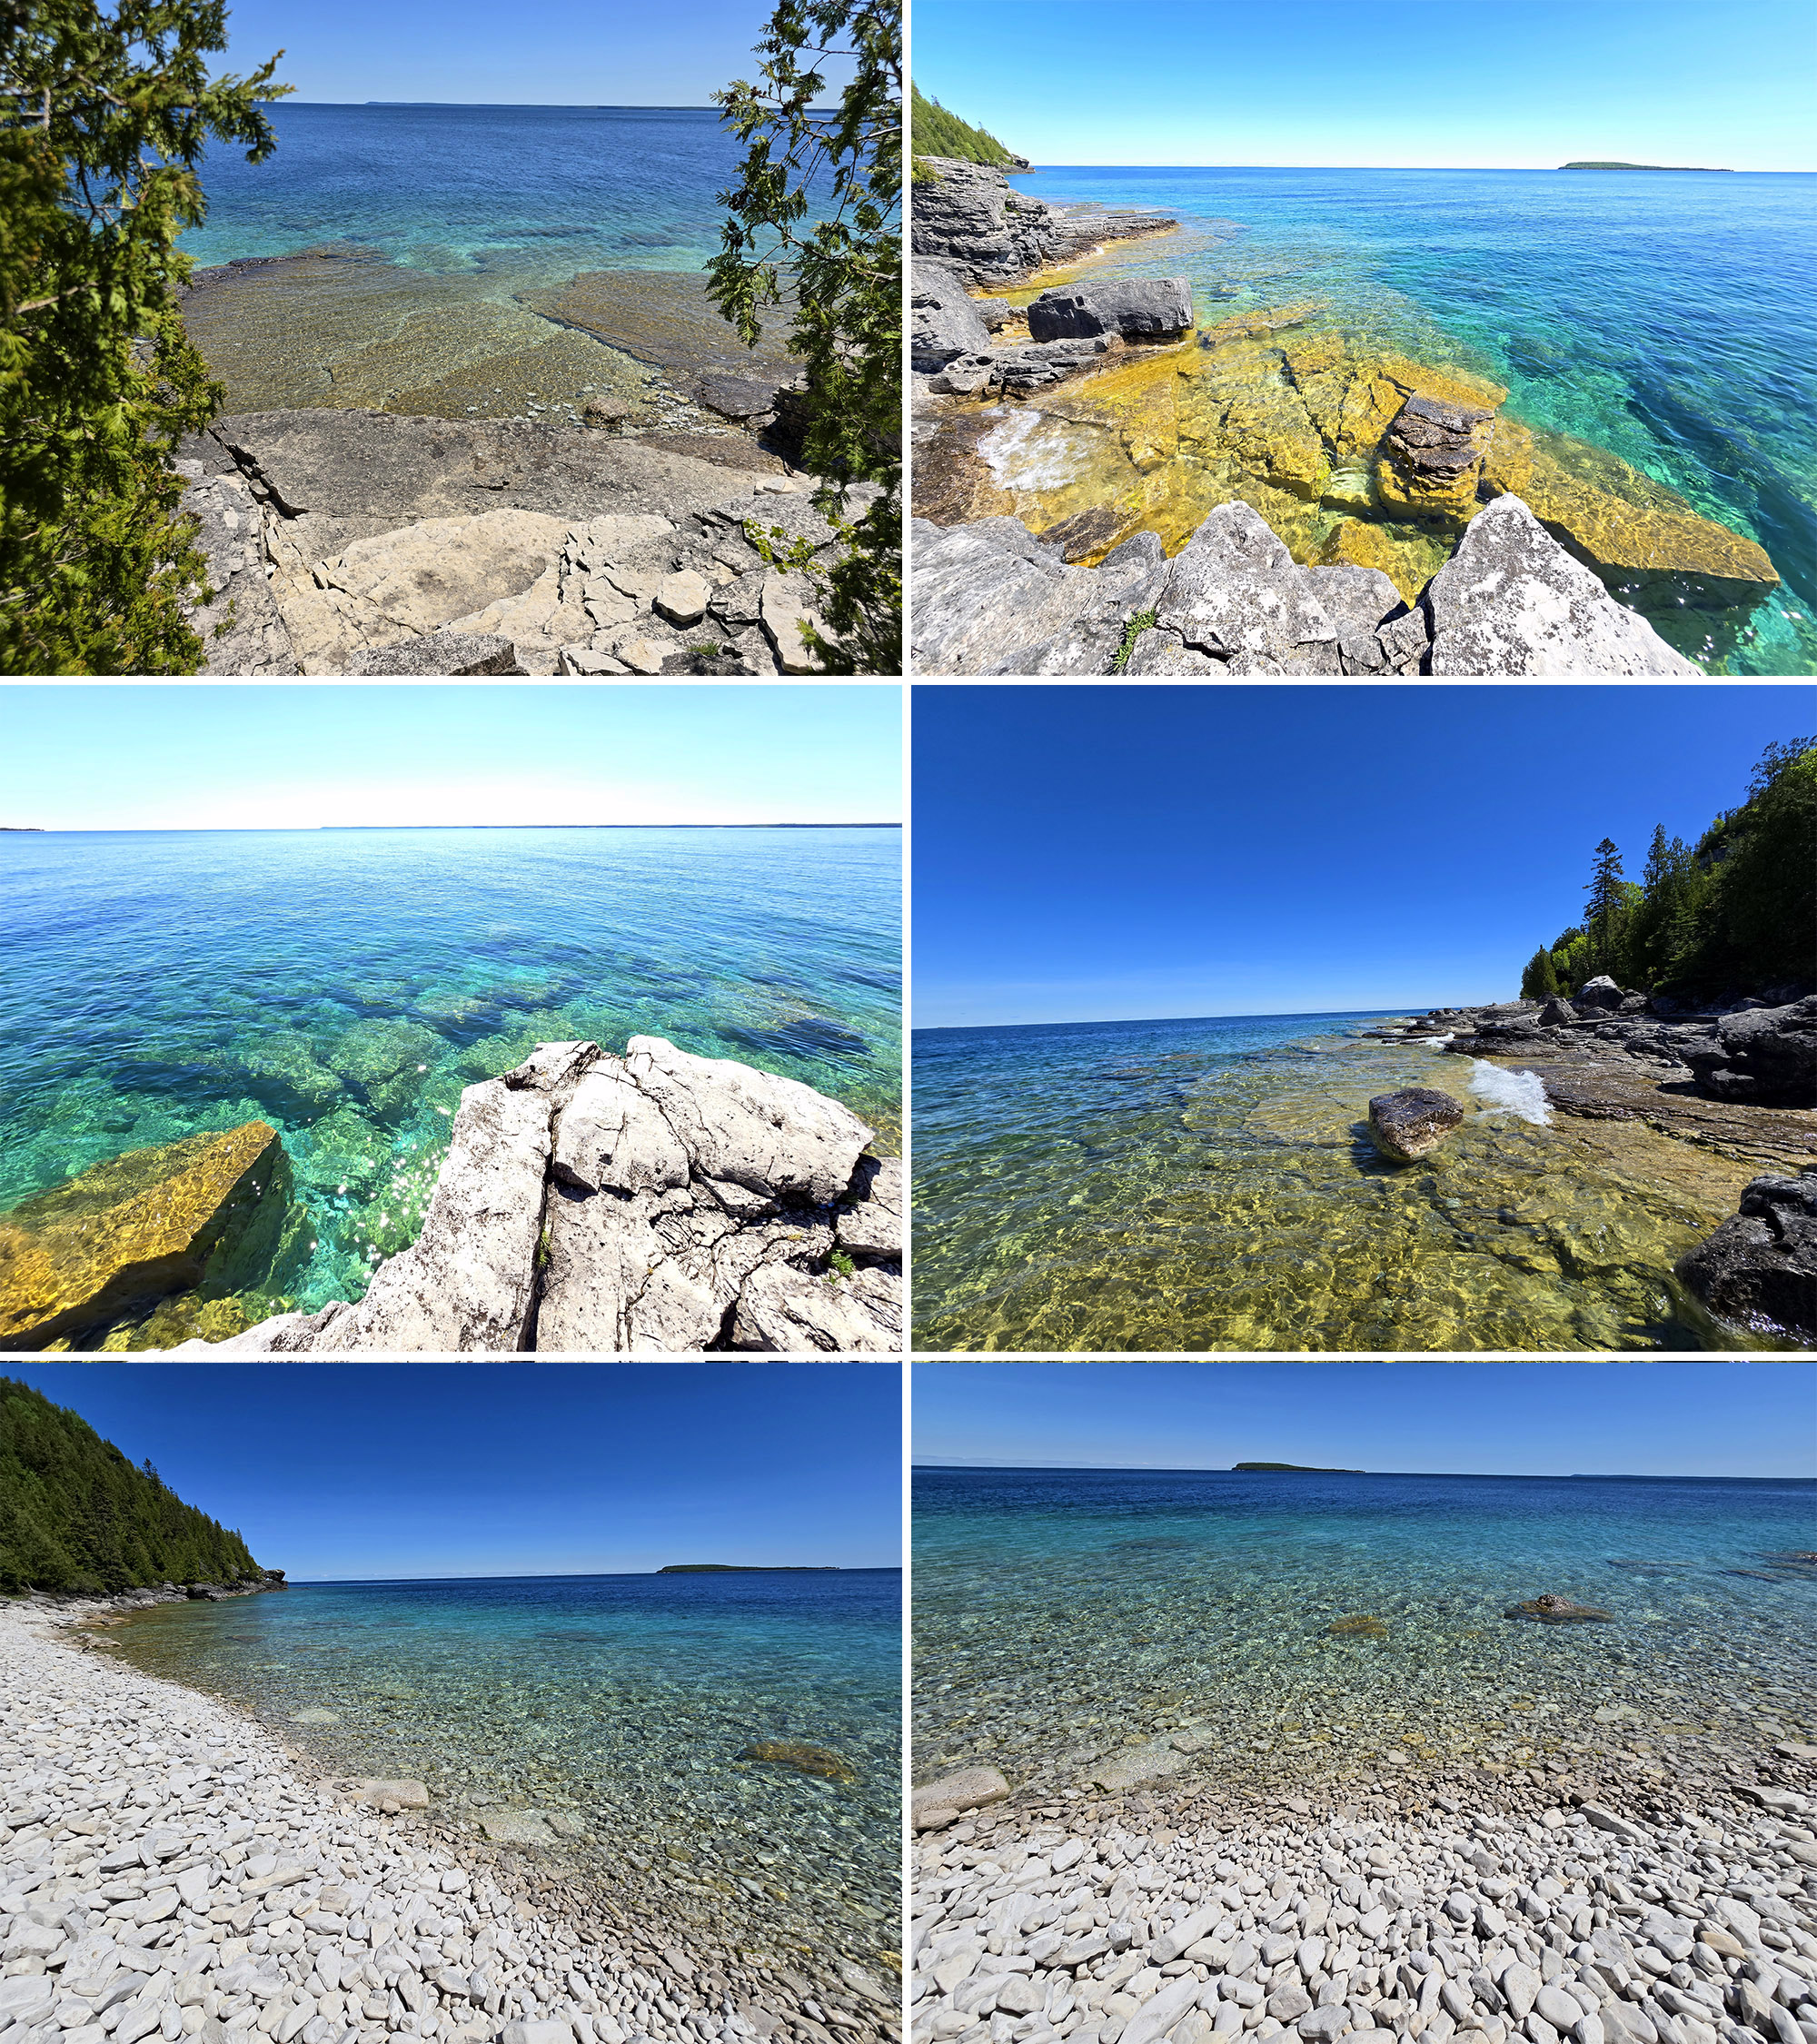 6 part image showing various views of crystal blue water and rocky shorelines at flower pot island.